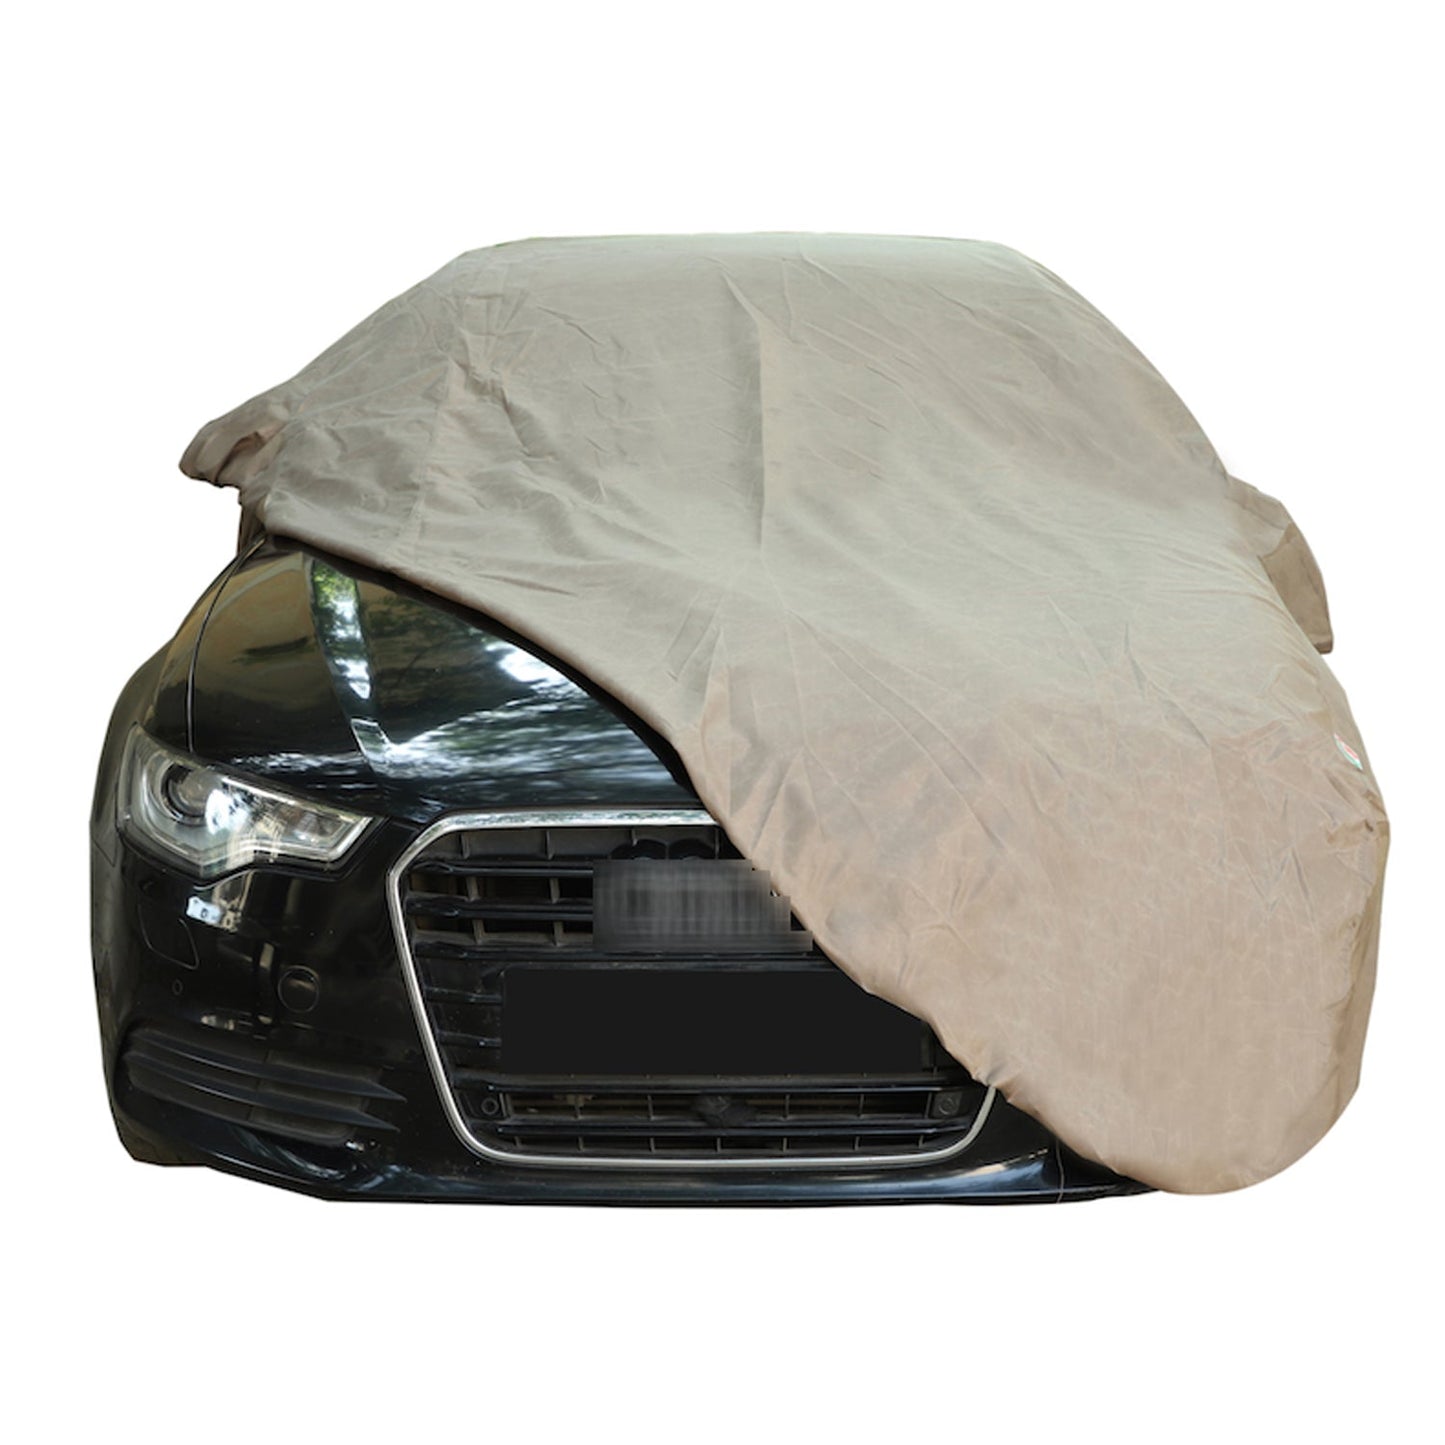 Oshotto Brown 100% Waterproof Car Body Cover with Mirror Pockets For Tata Tigor